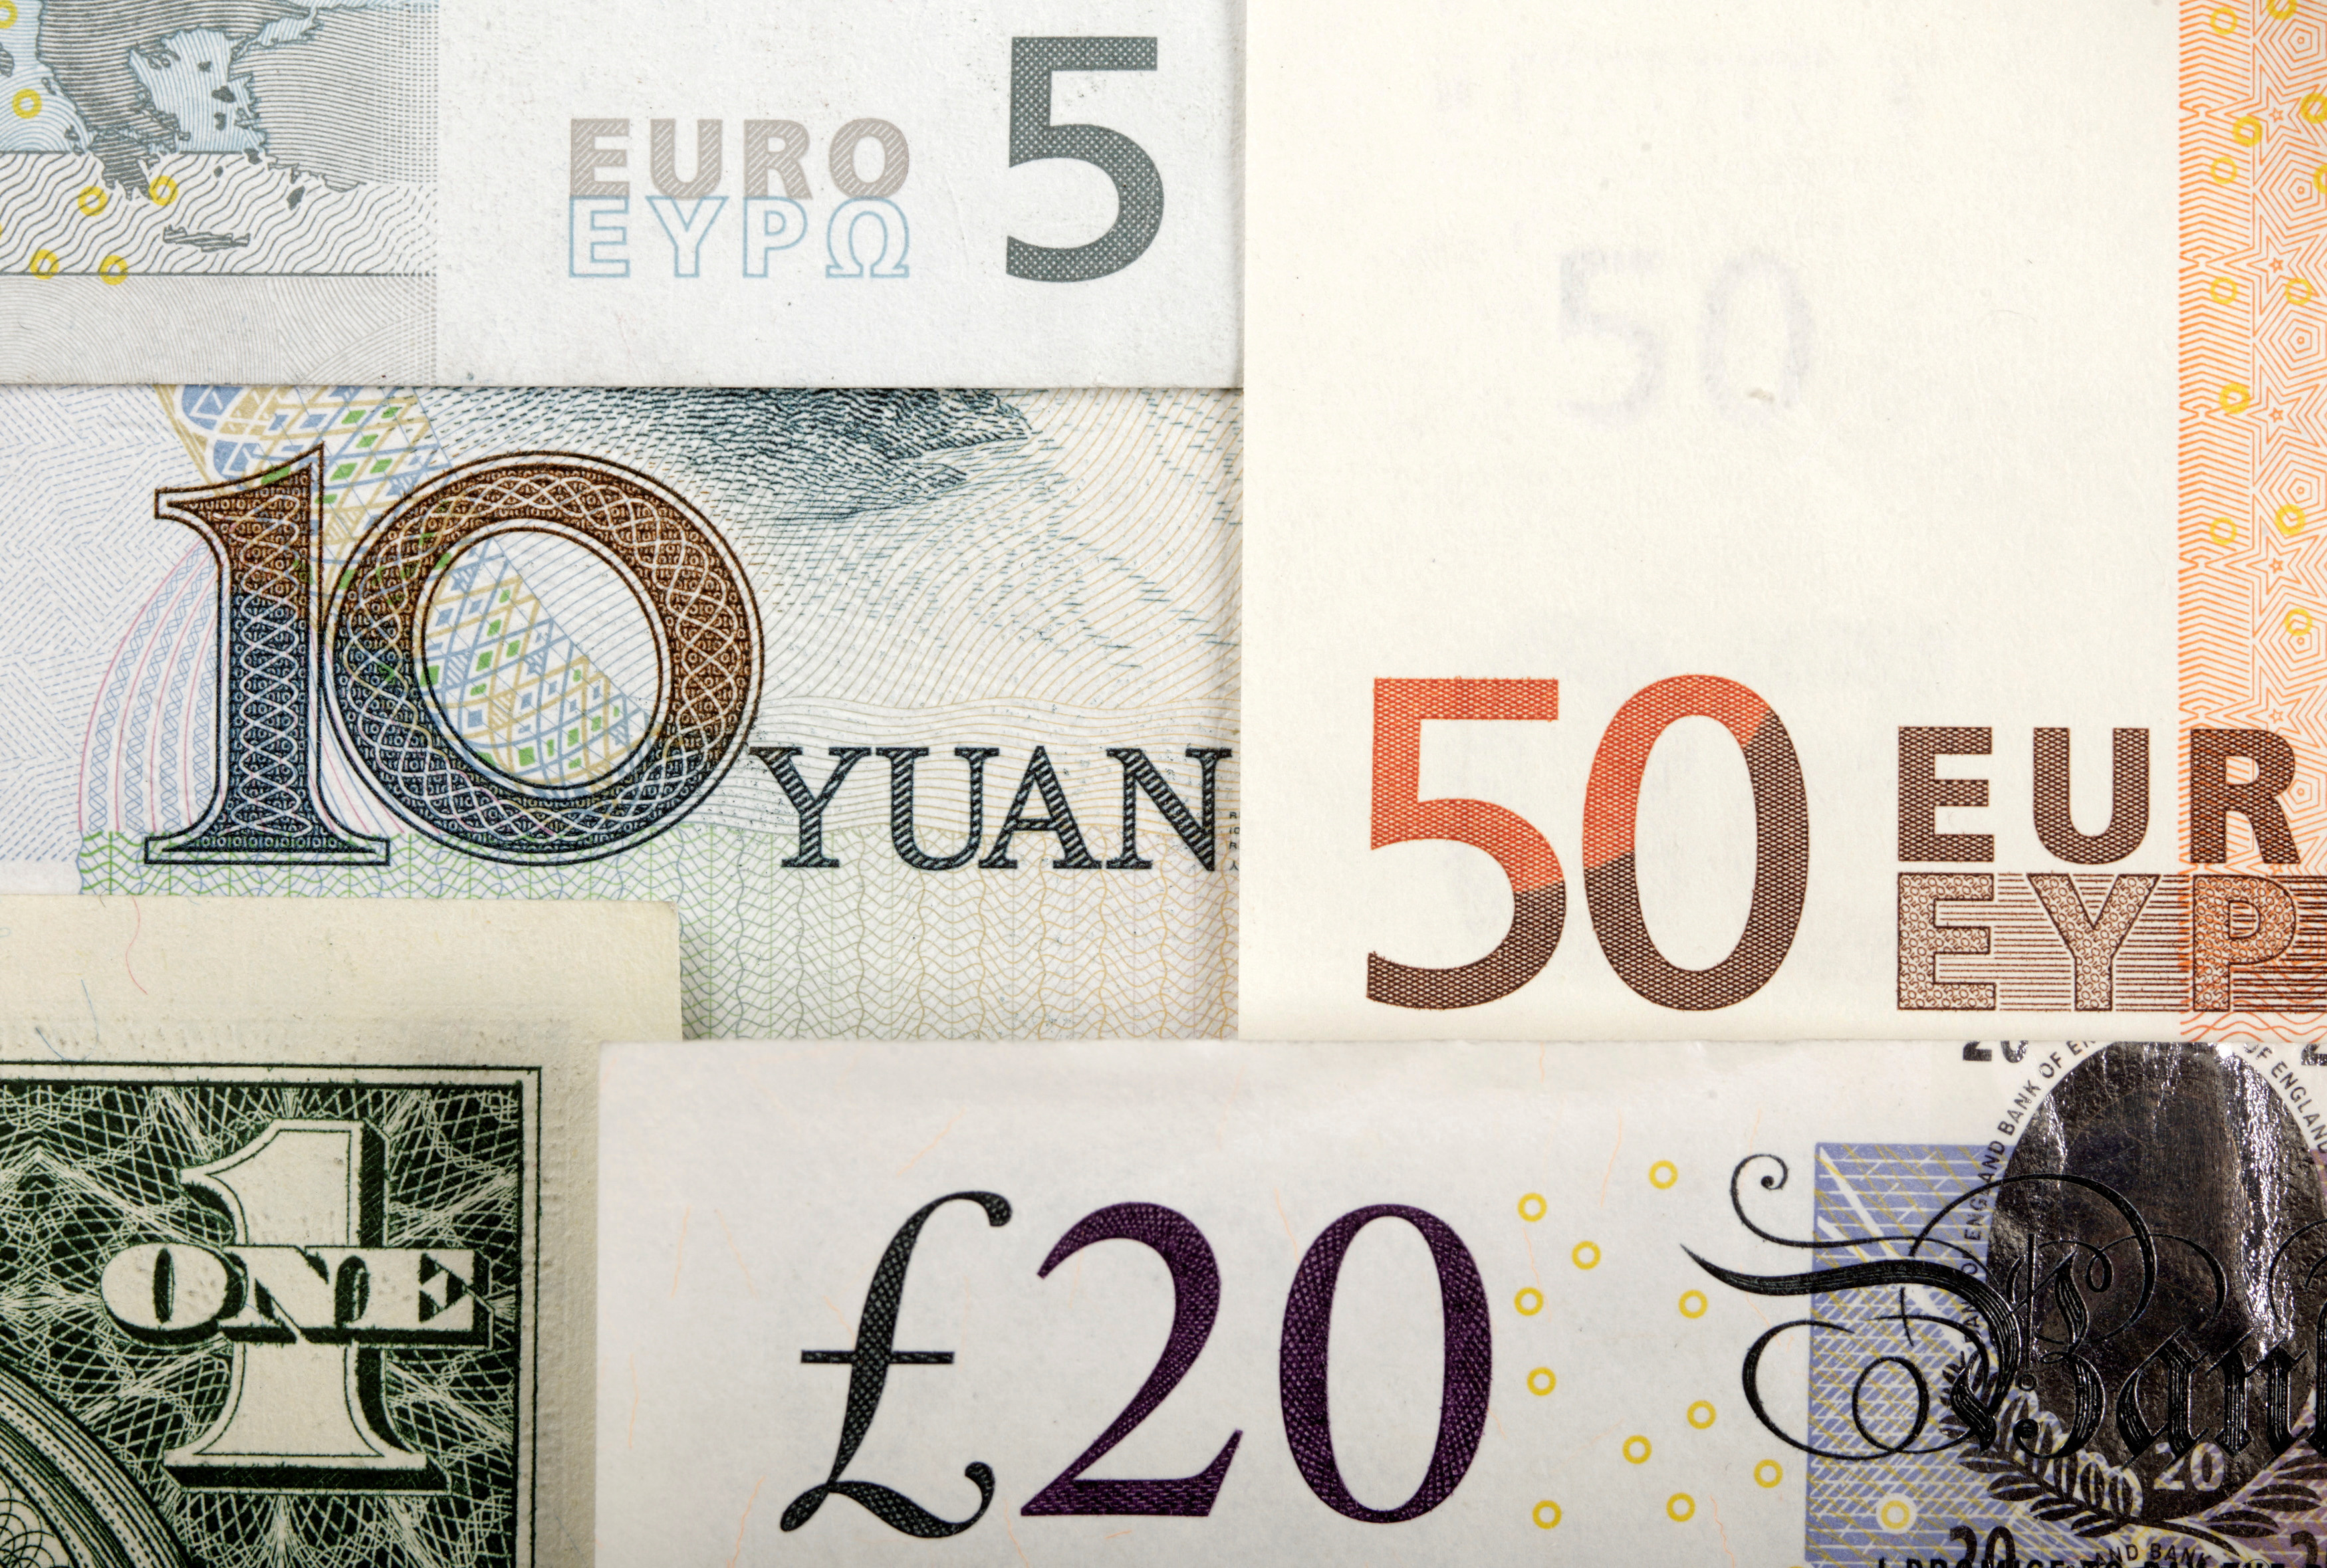 Arrangement of various world currencies including Chinese Yuan, US Dollar, Euro, British Pound